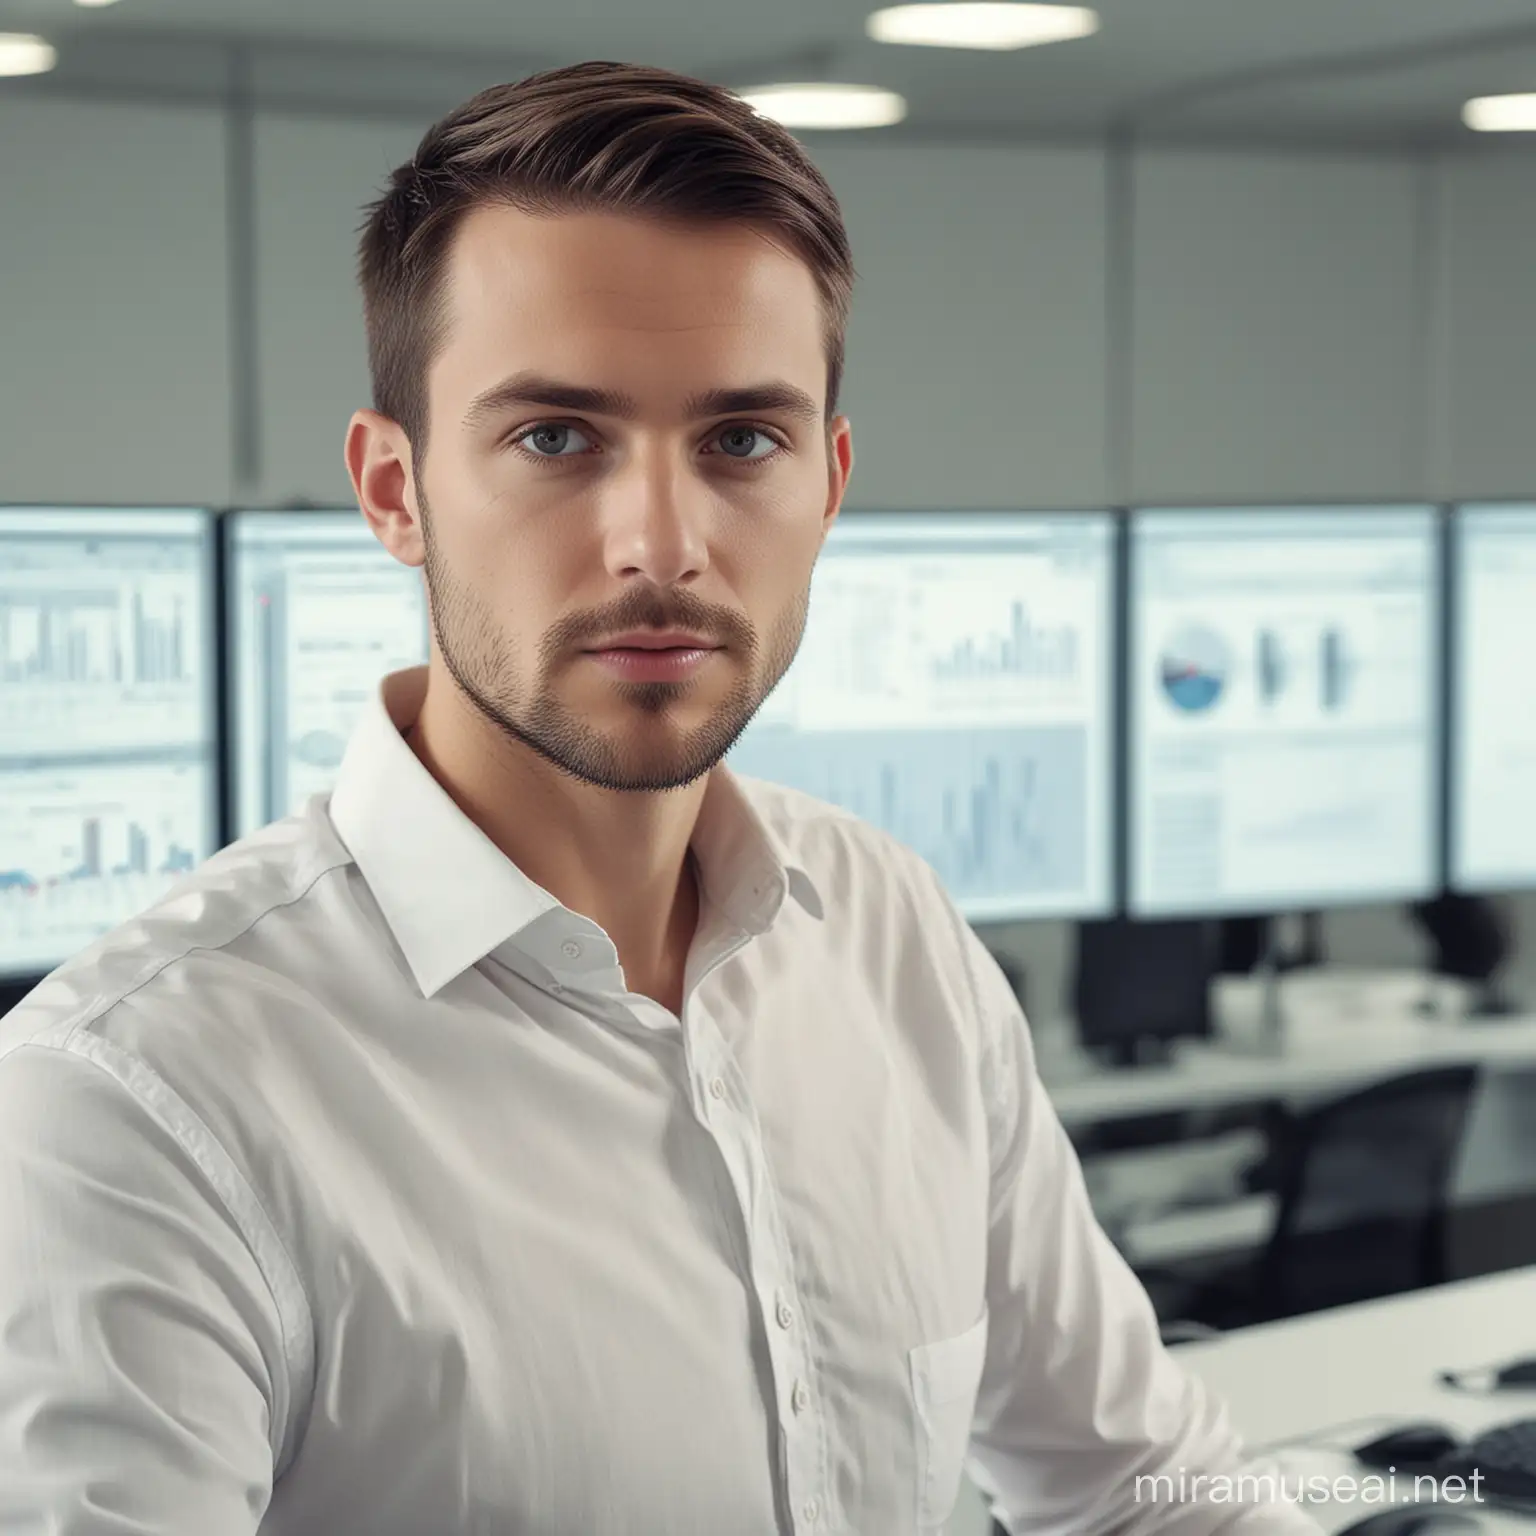 Fashionable Polish White Male in Analytics with Blurred Dashboard Background